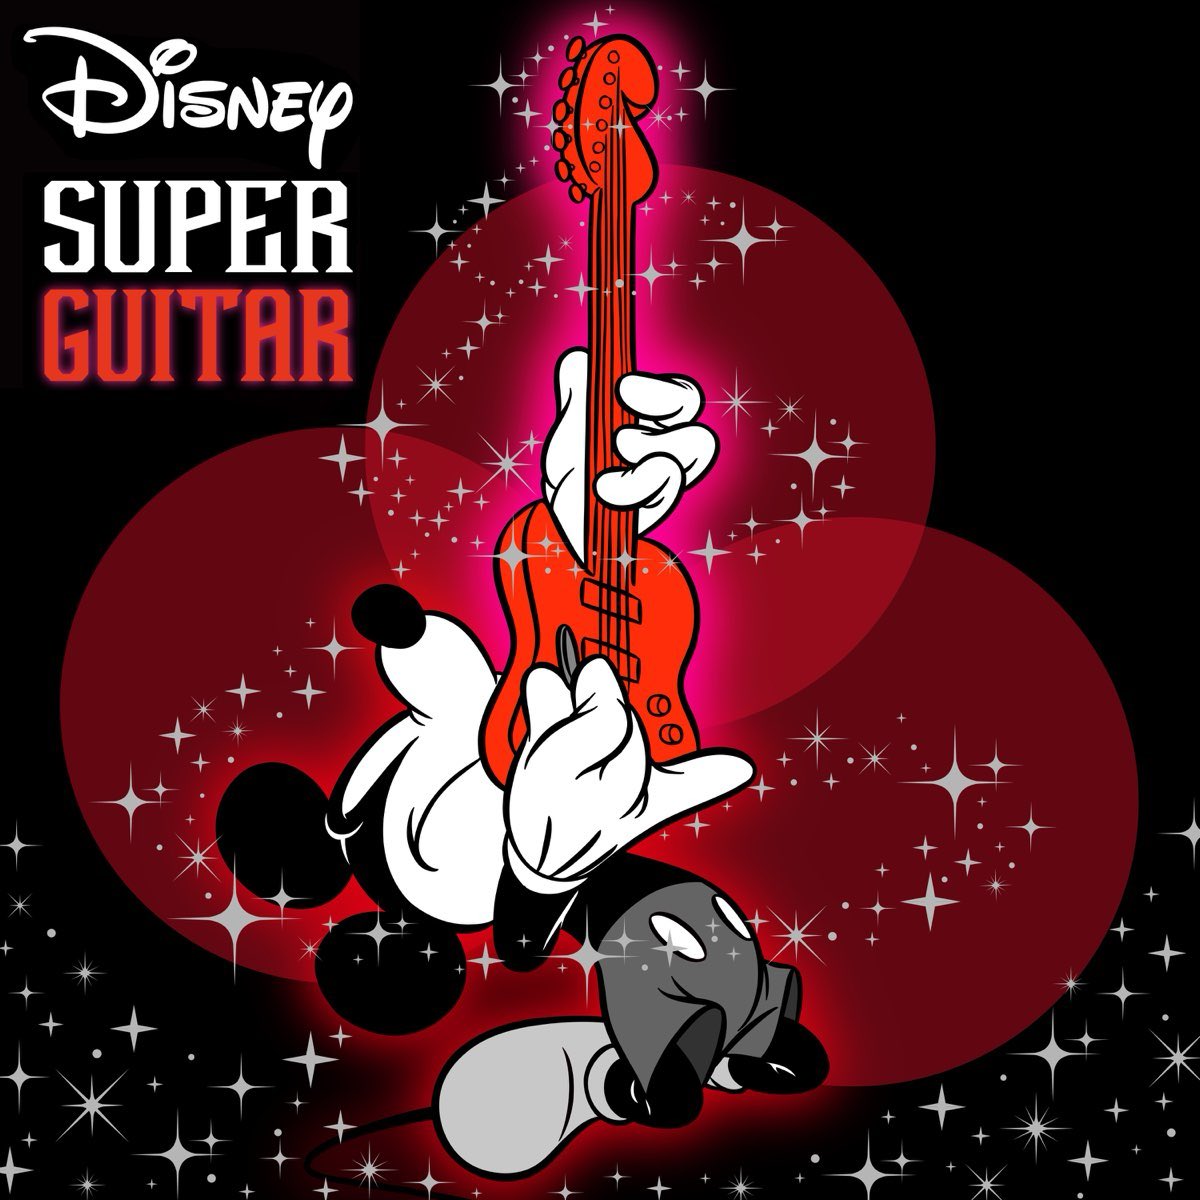 #NowPlaying 🎶 Some Day My Prince Will Come Orianthi [Super Guitar Disney] #HardRock 0:00 ❍─────── 3:34 ★★★ ↻ ⊲ Ⅱ ⊳ ↺ volume: ▁▂▃▄▅▆▇ 100%